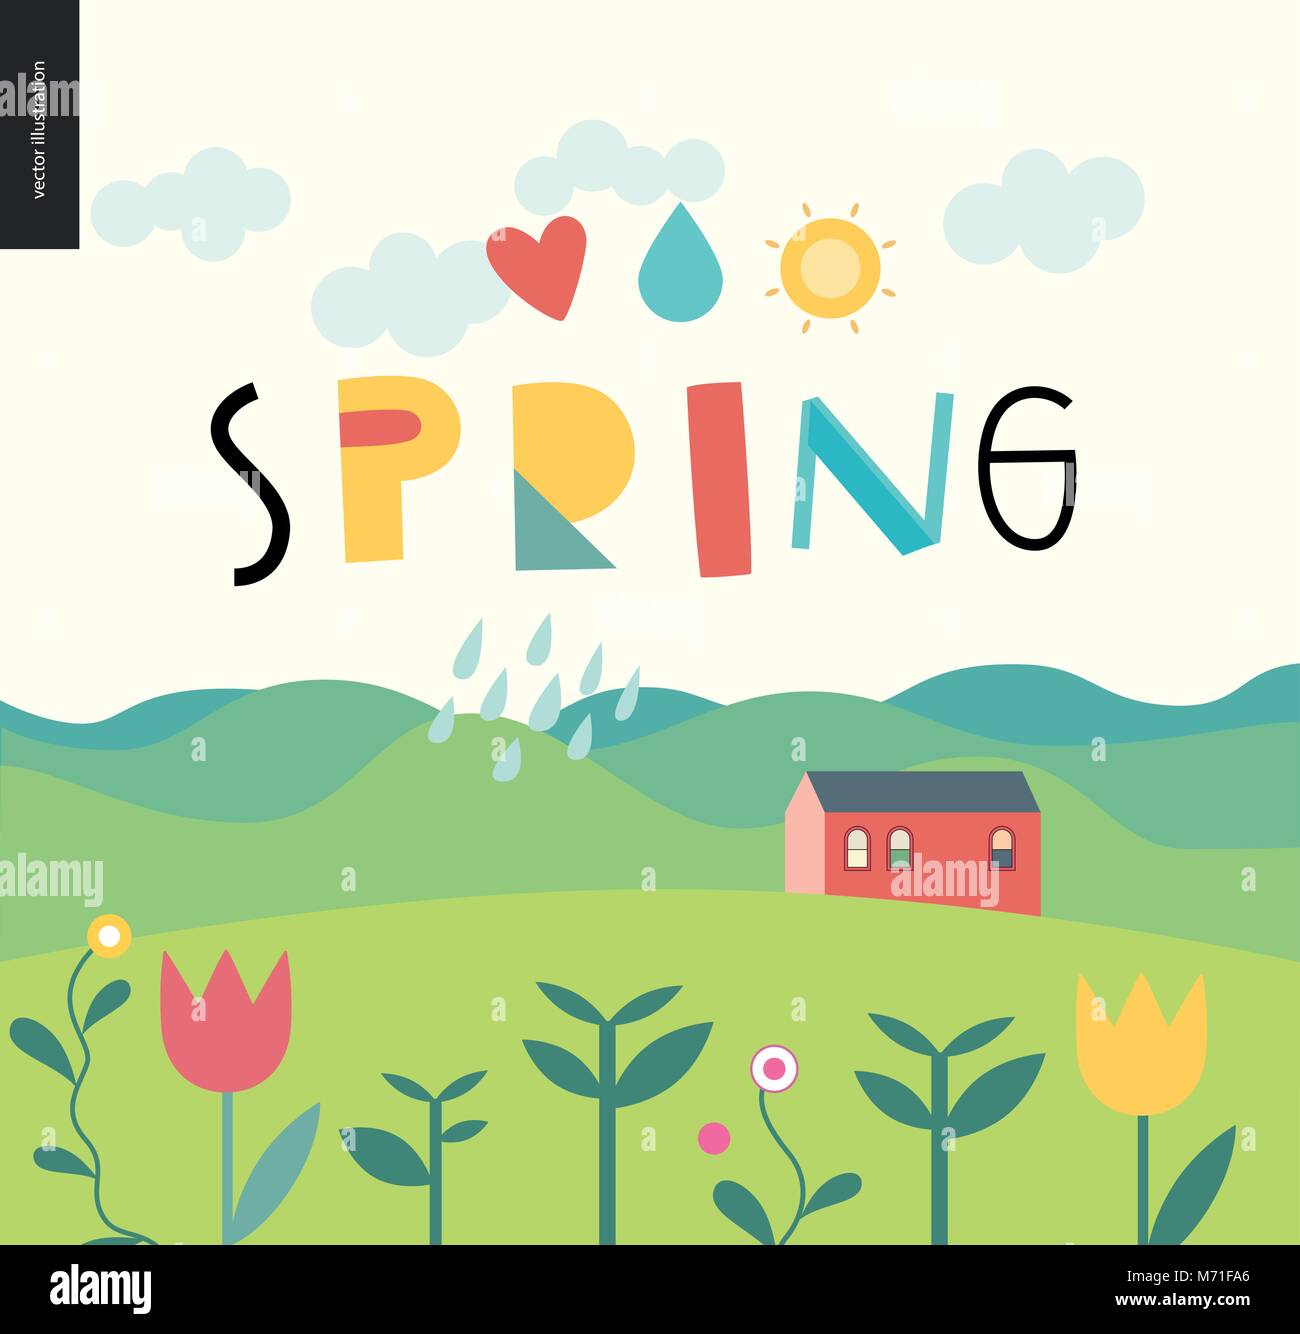 Spring lettering and landcape with hills, house, plants and rain Stock Vector